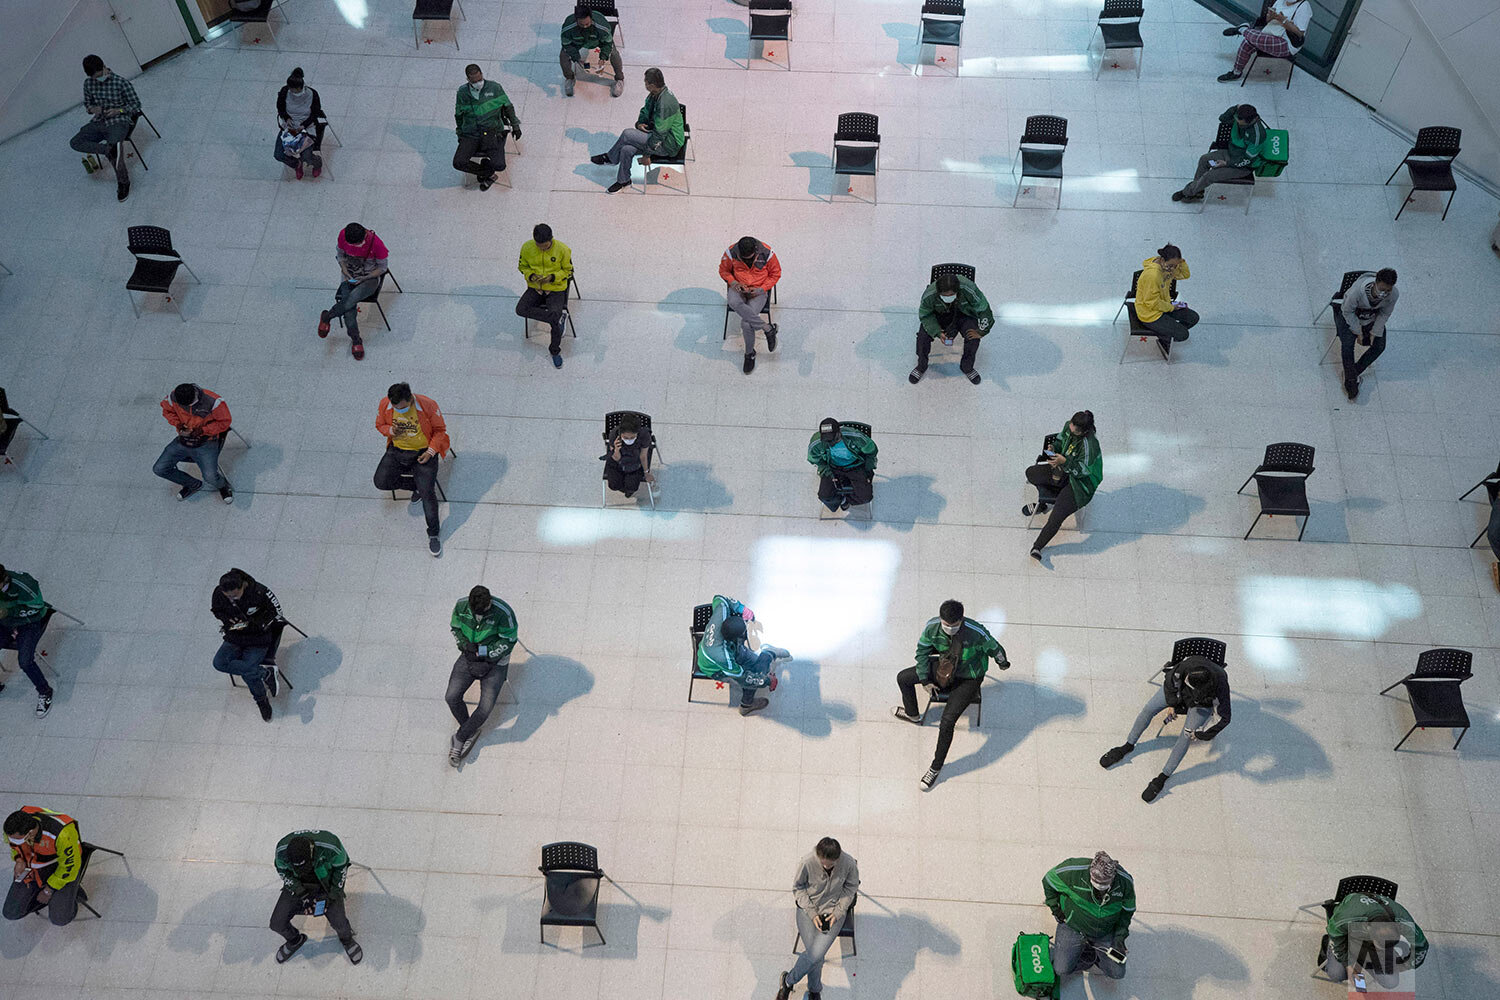  People practice social distancing in the hopes of preventing the spread of the coronavirus as they sit on chairs spread apart in a waiting area for take-away food orders at a shopping mall  in Bangkok, Thailand, Tuesday, March 24, 2020. (AP Photo/Sa